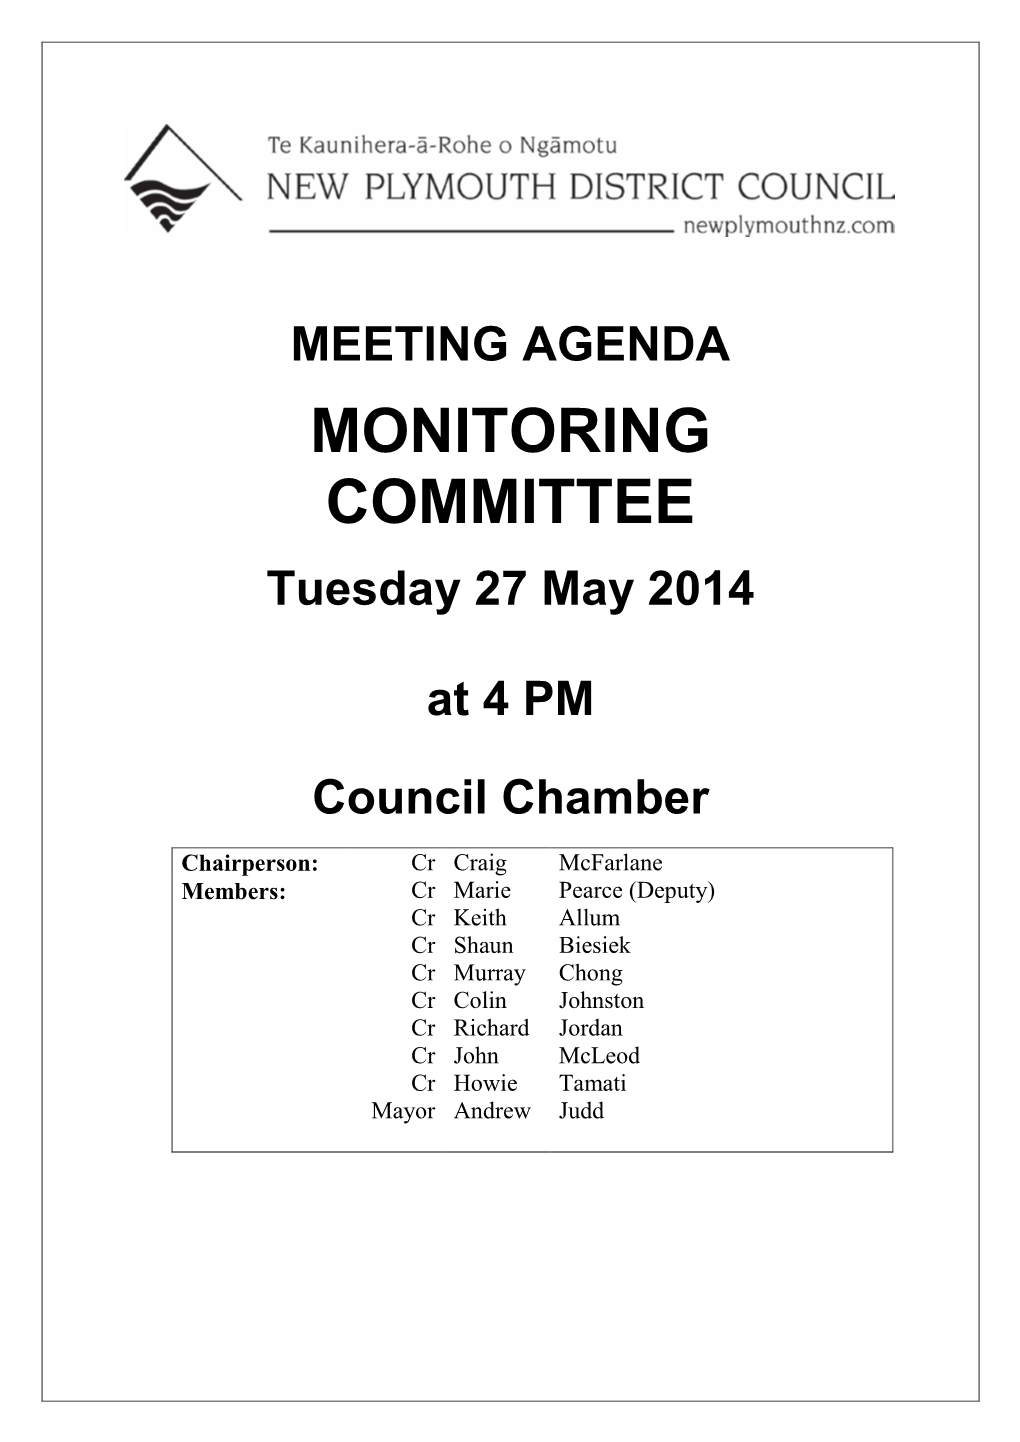 Monitoring Committee